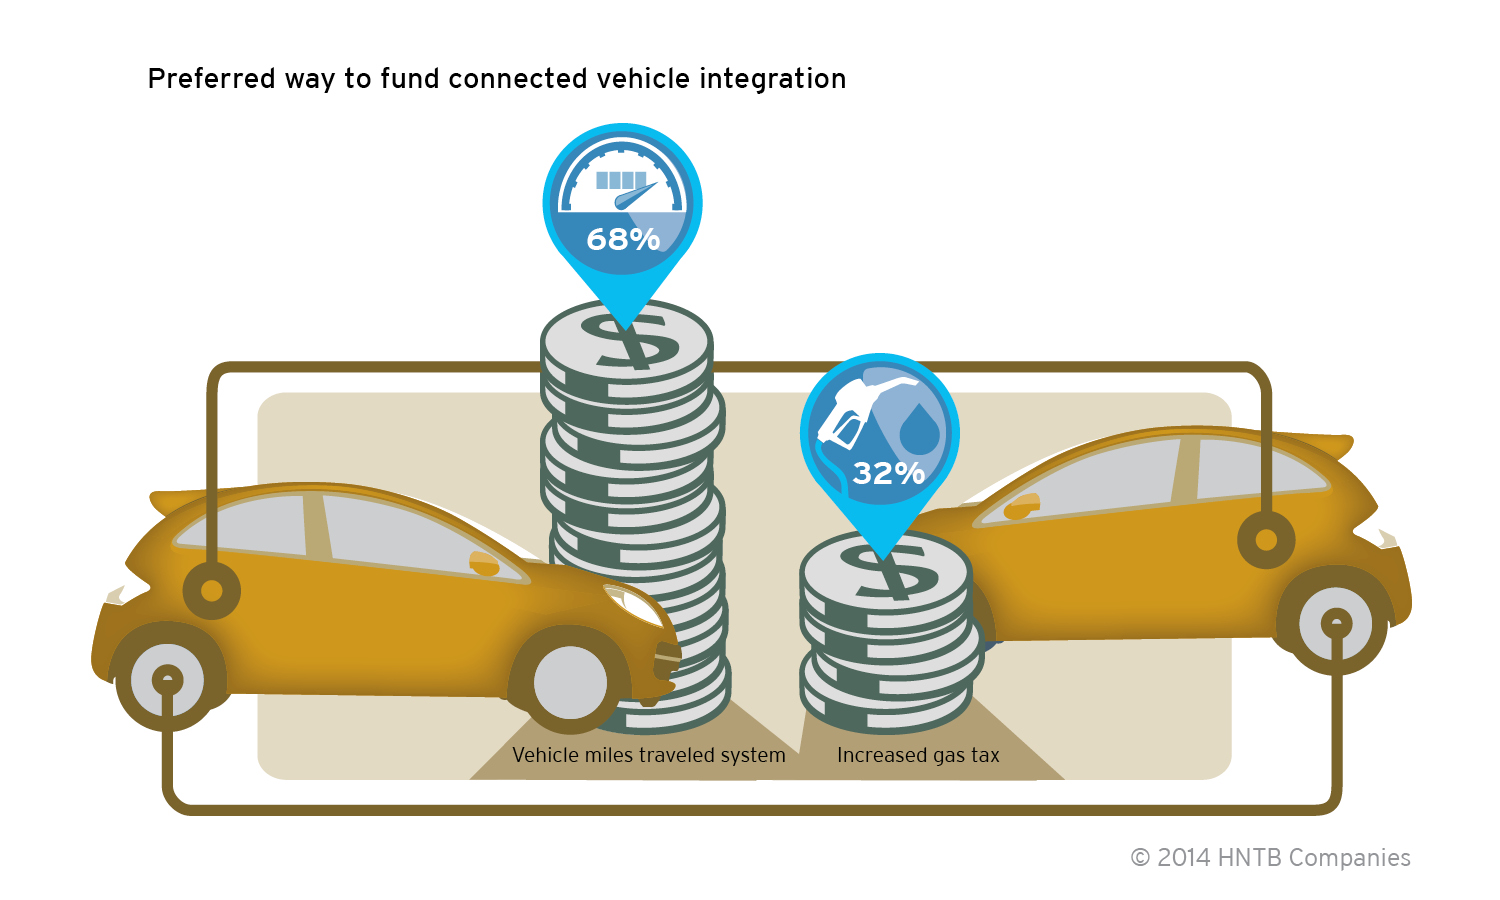 Nearly seven in ten (68 percent) Americans would rather pay for connected vehicle integration implementation with a vehicle miles traveled system than an increased gas tax.